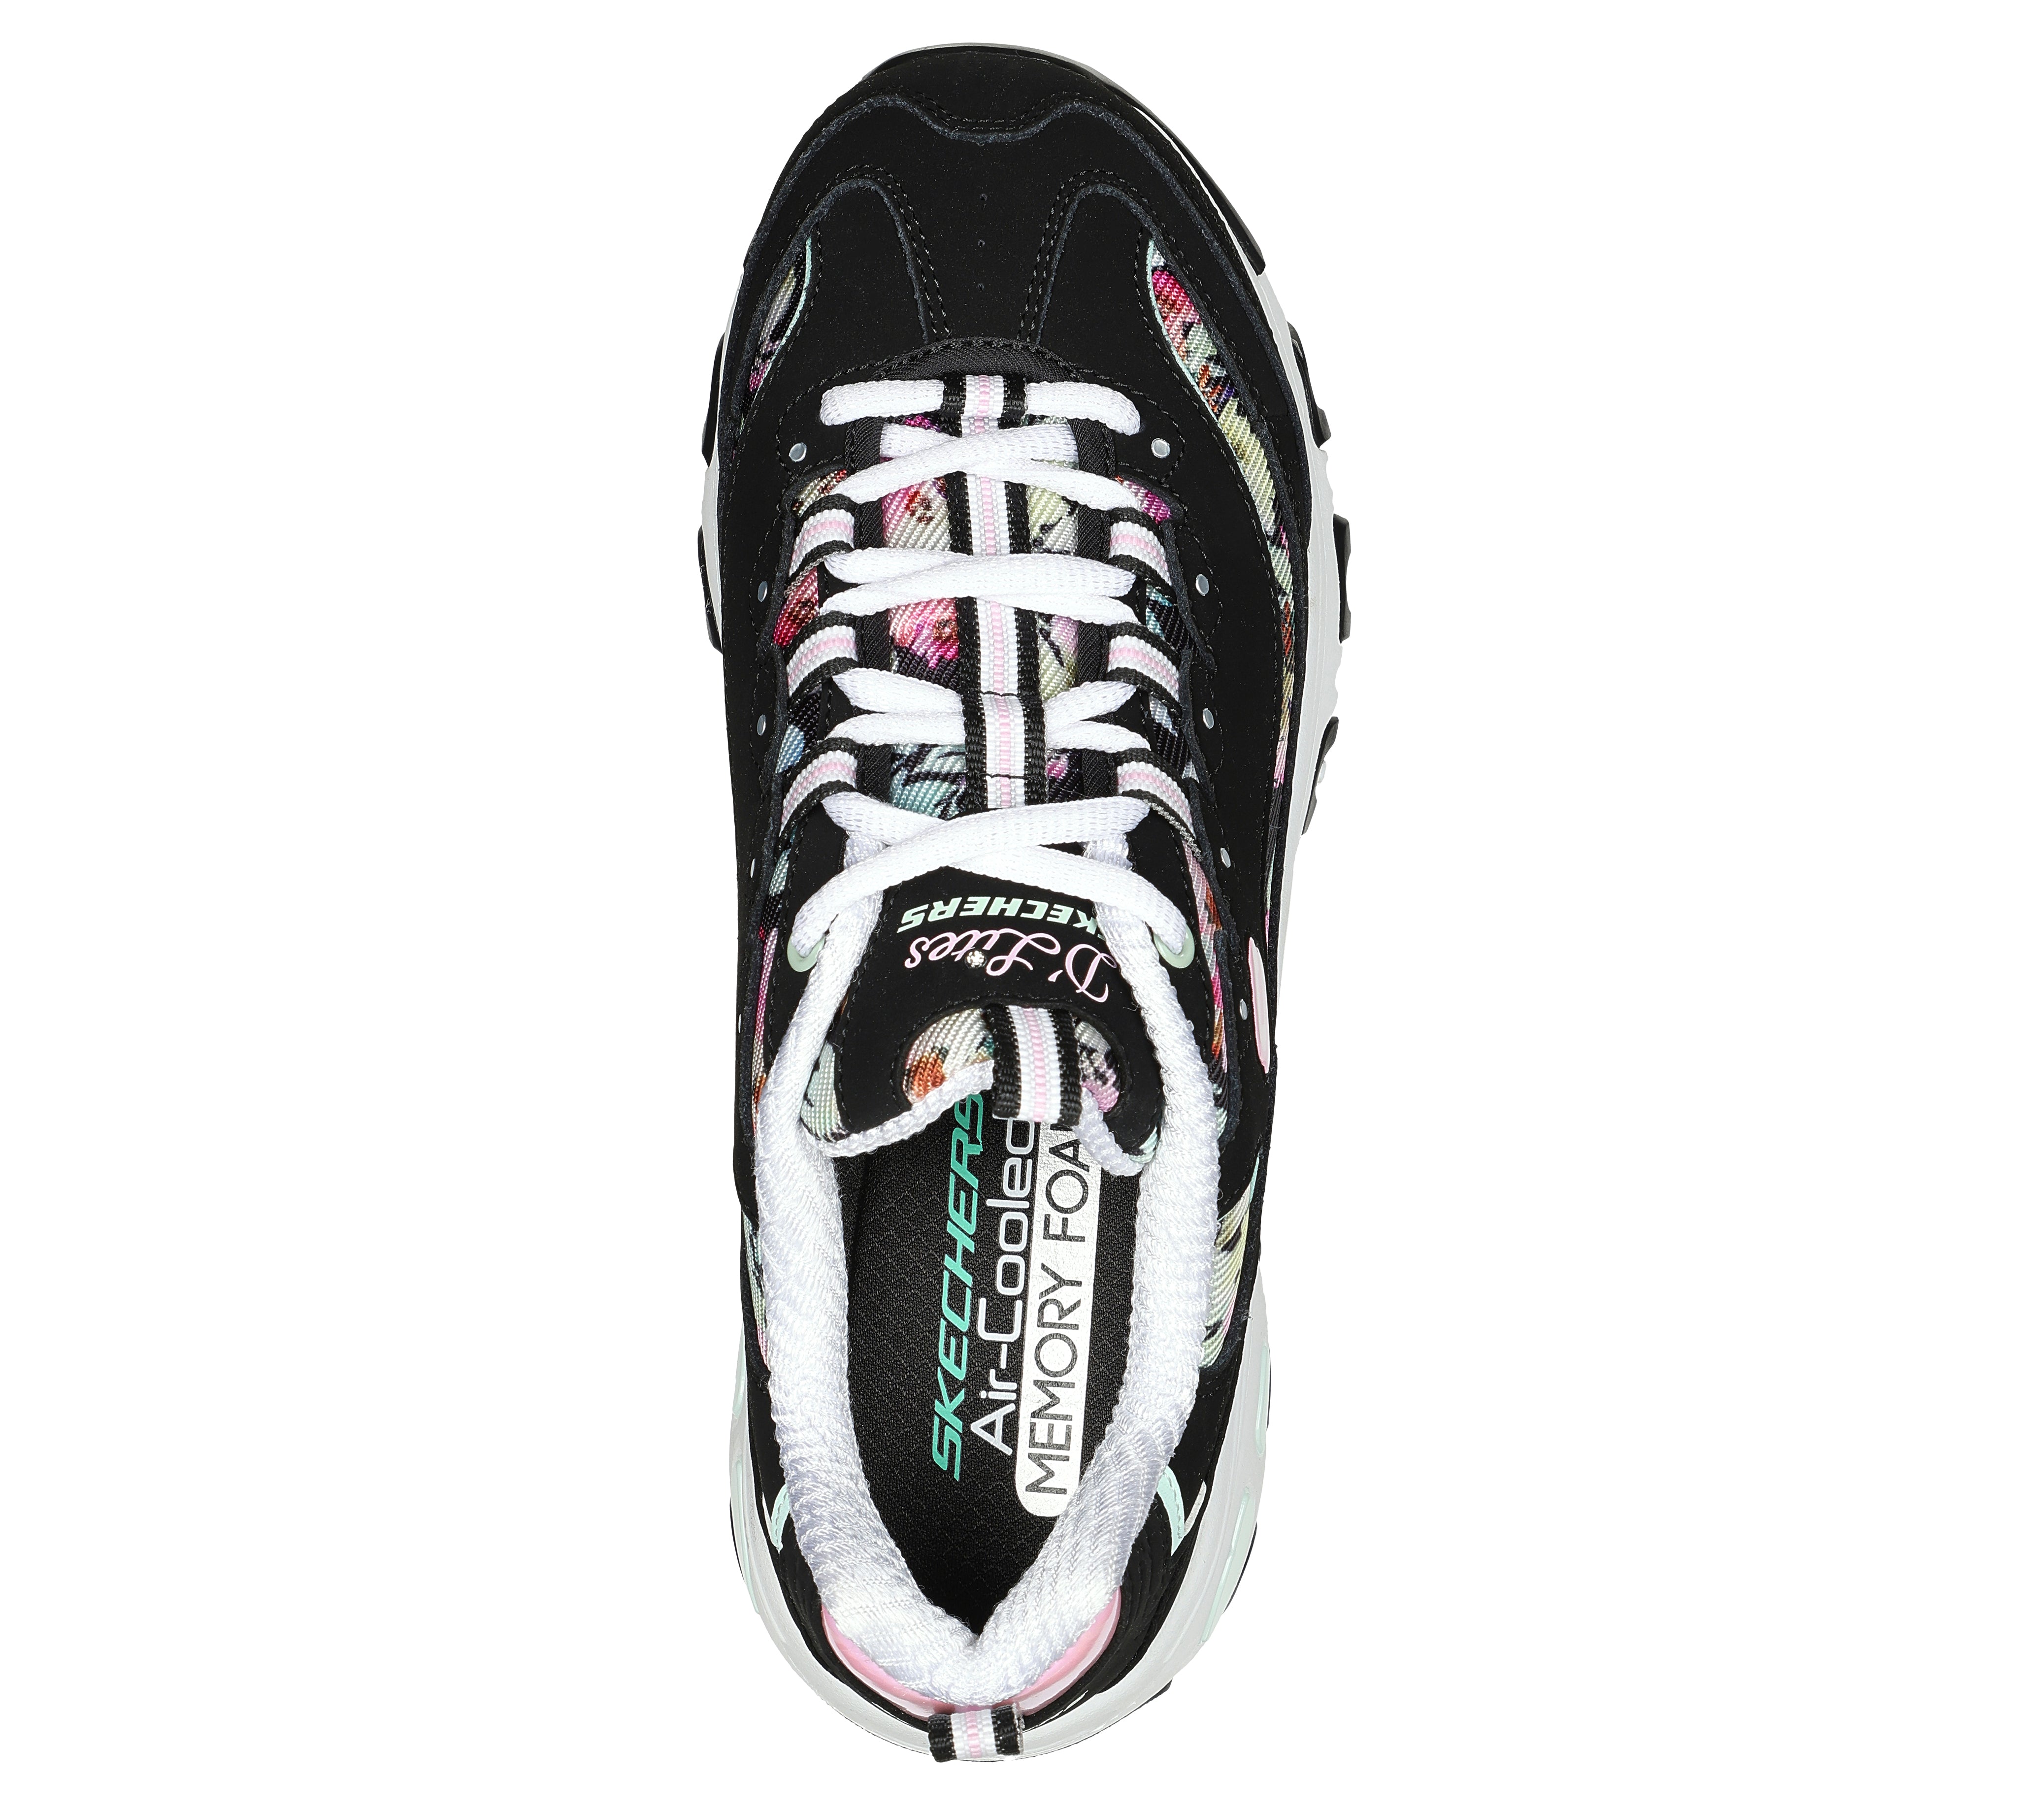 Skechers 149794 D'lites - Blooming Fields Ladies Black Multi Leather Lace Up Trainers